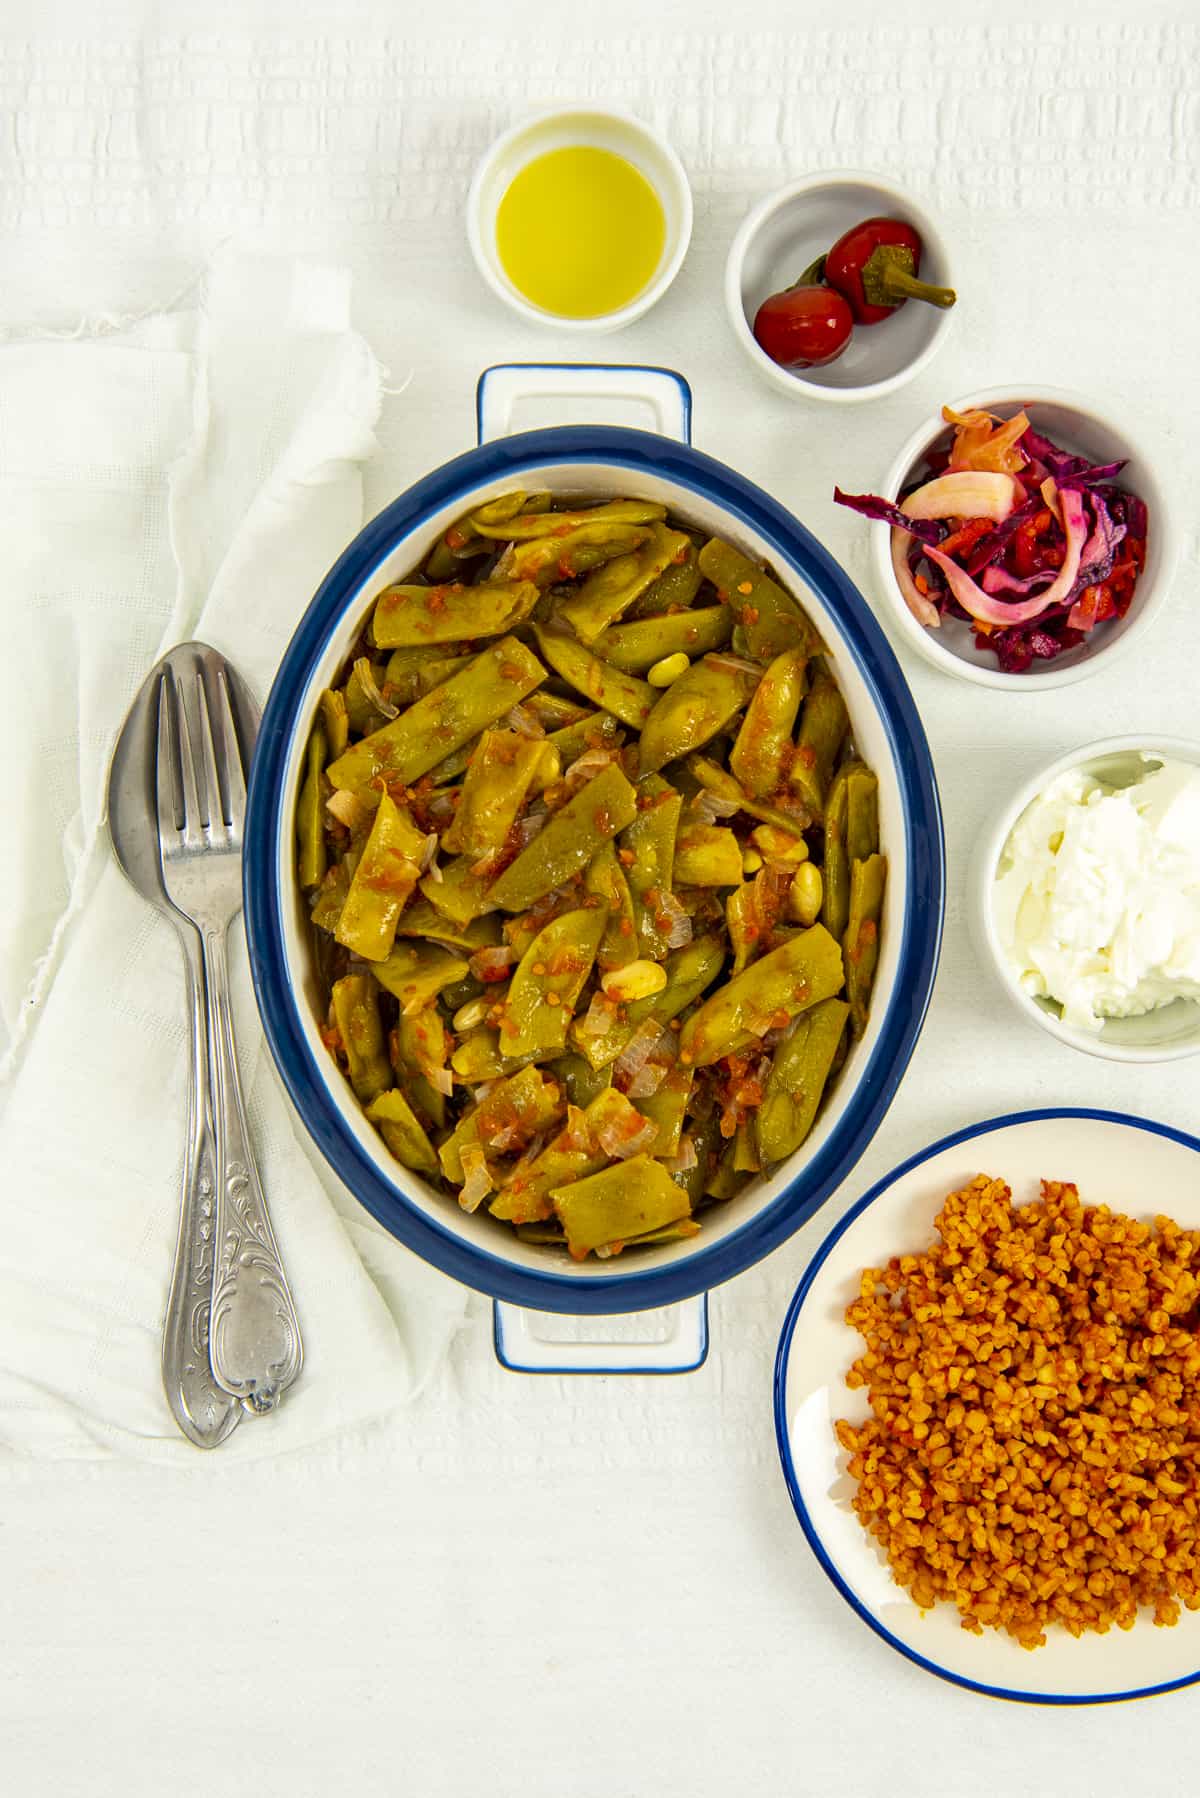 Turkish green beans served in a white oval dish and bulgur pilaf, pickles and yogurt on the side.